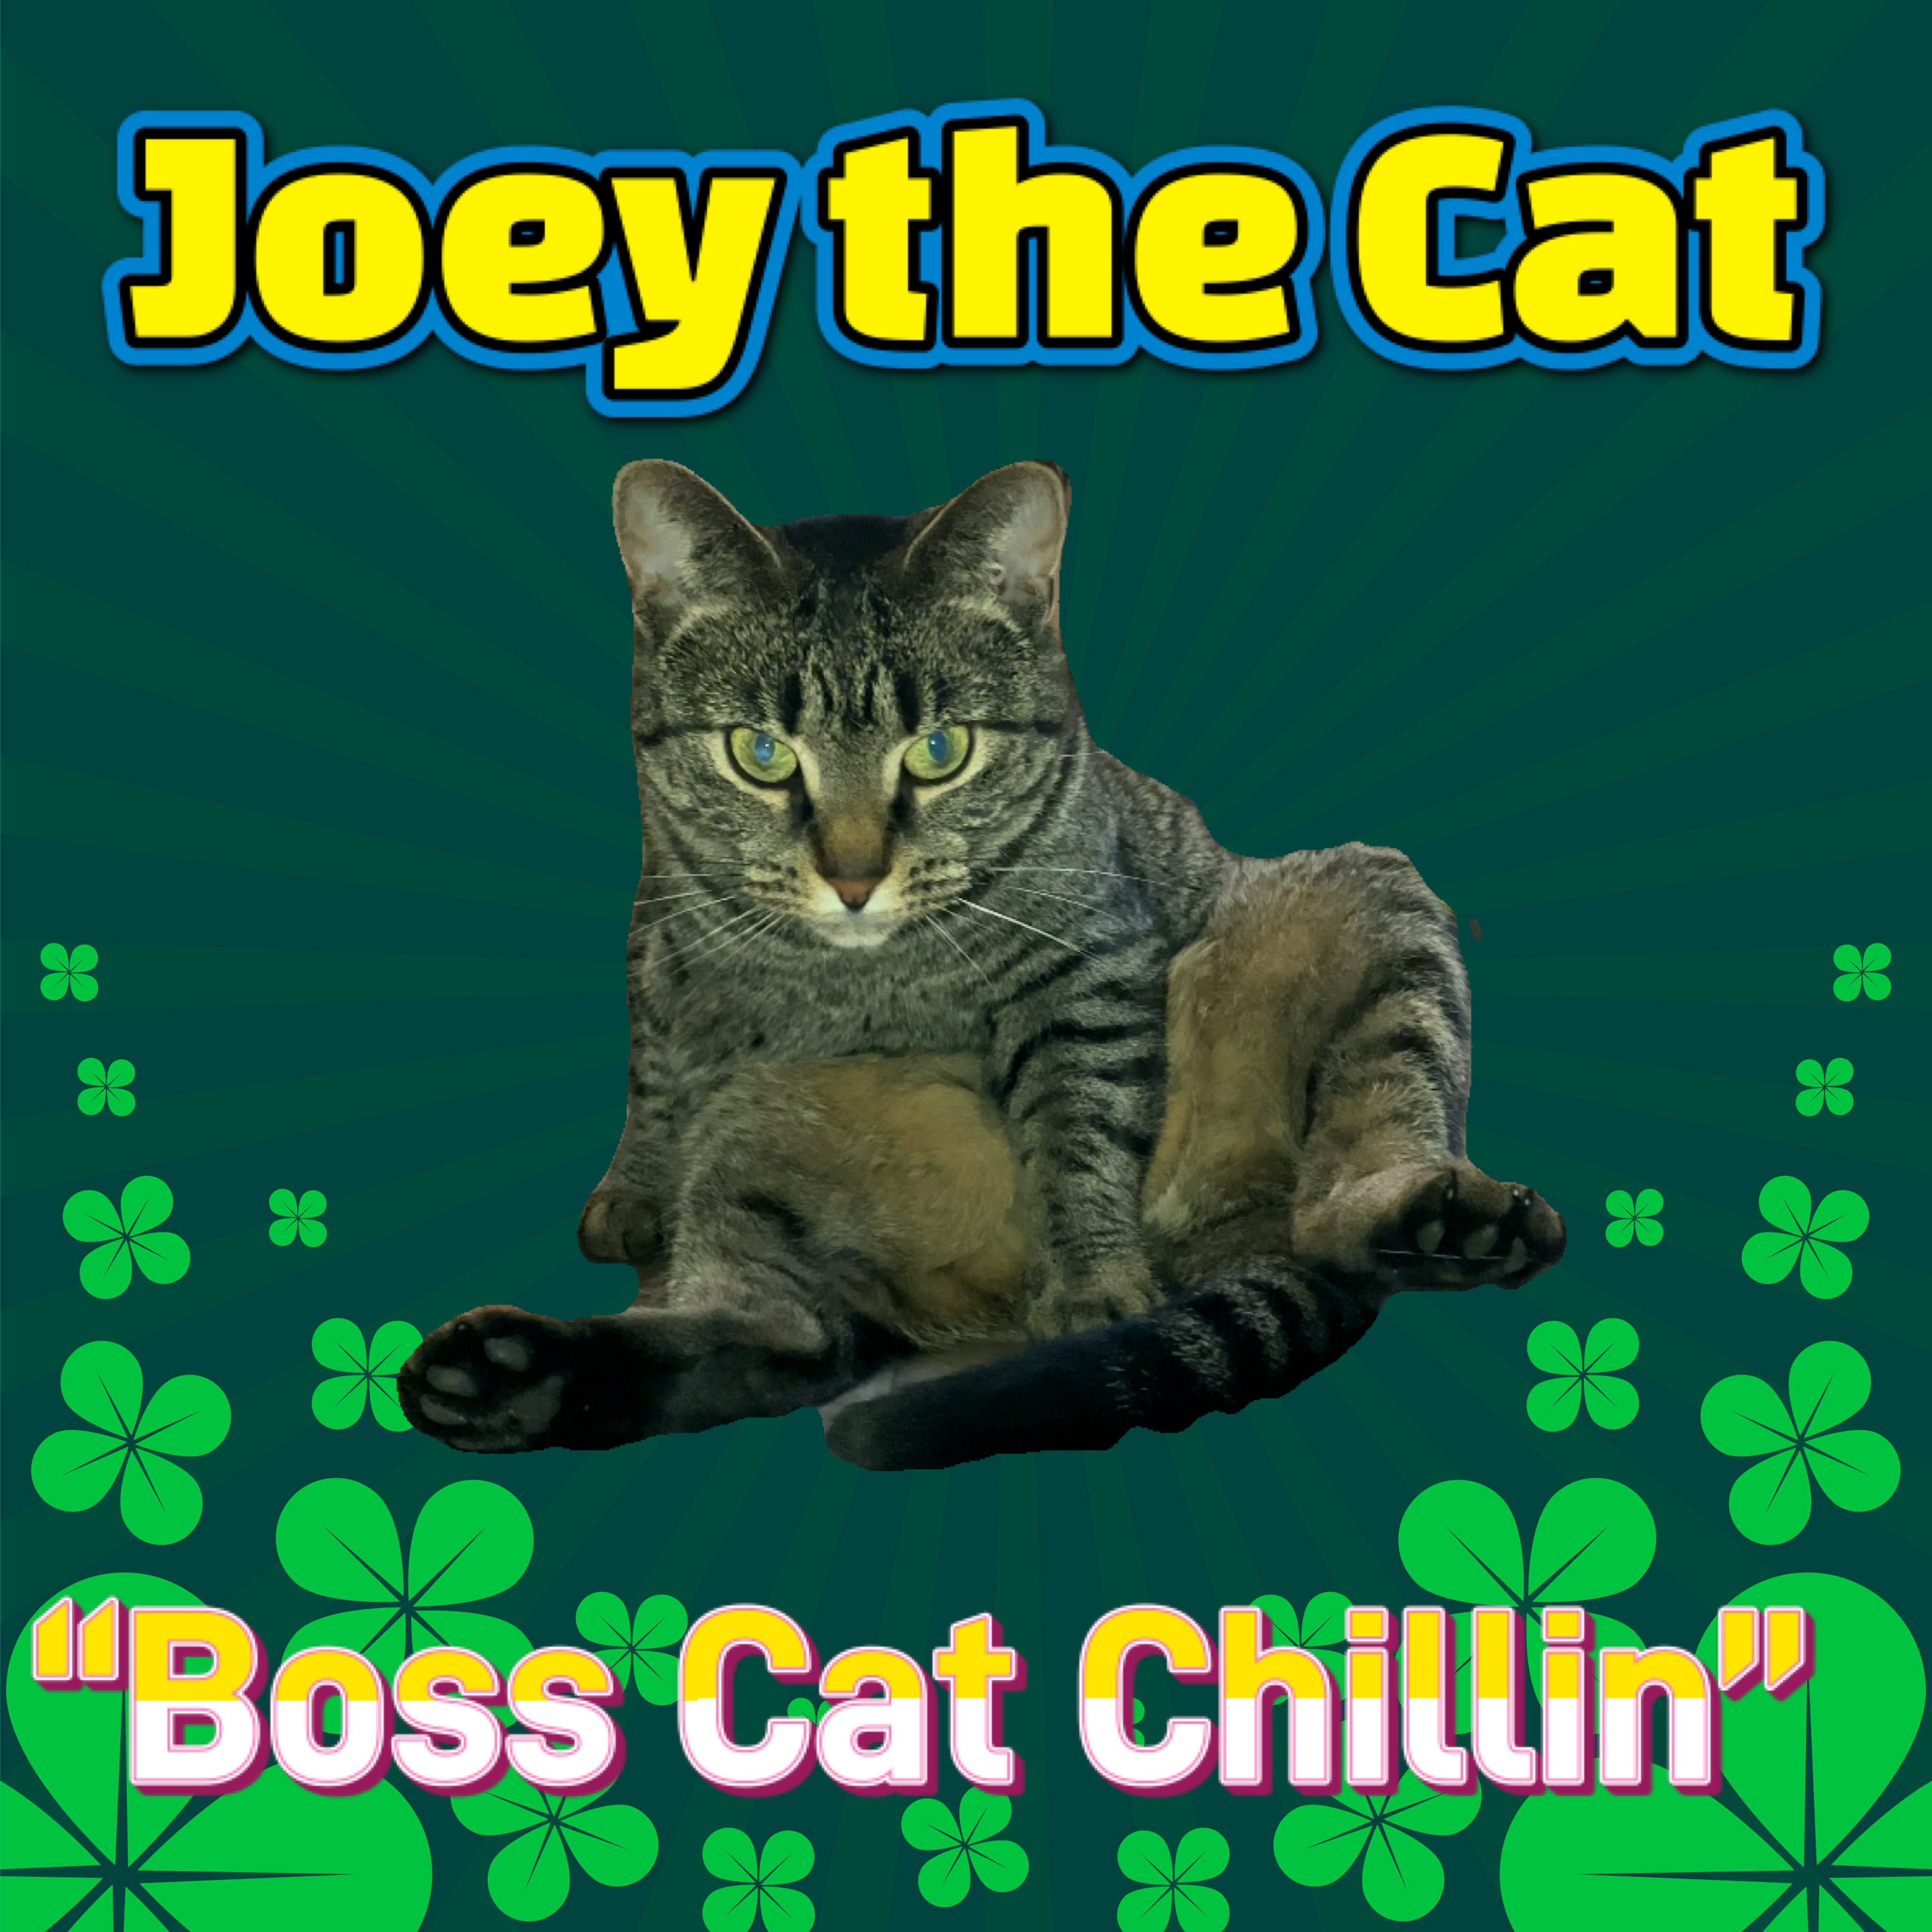 Joey the Cat the Famous Social Media Cat who everyone is talking about